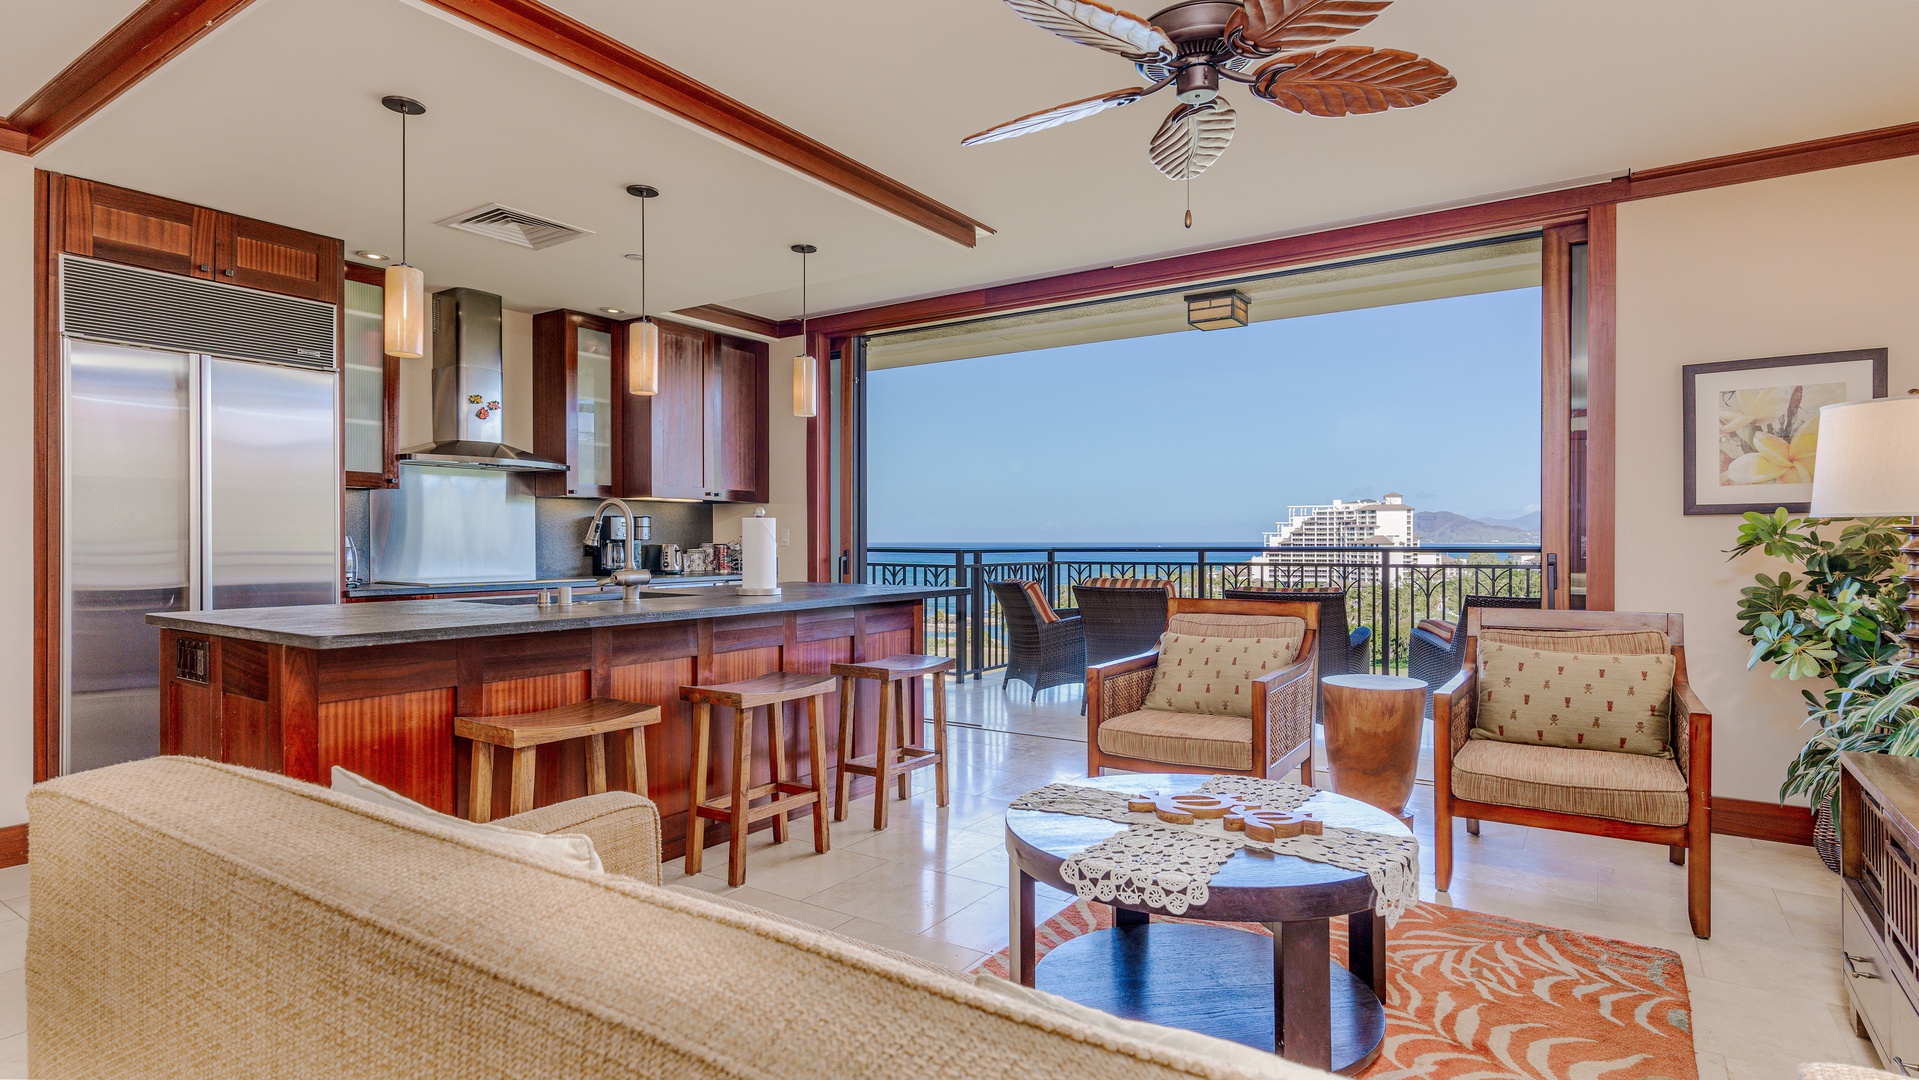 Kapolei Vacation Rentals, Ko Olina Beach Villas B1101 - An open floor plan with incredible views and a fully appointed kitchen with stainless steel appliances.